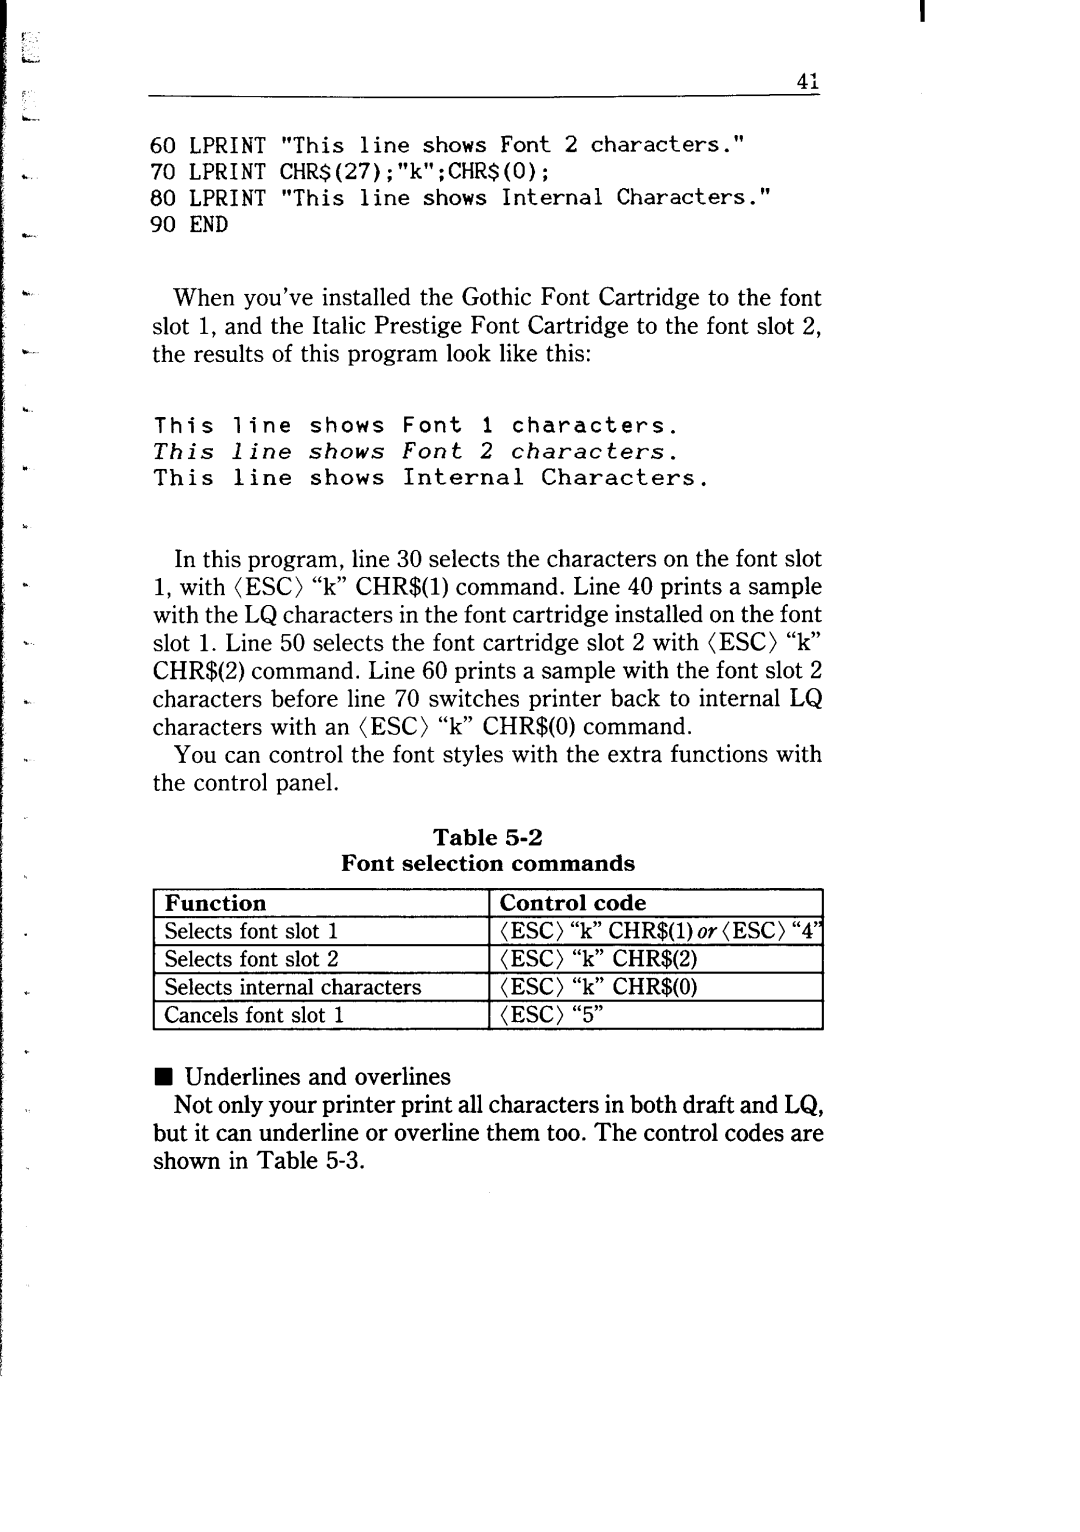 Star Micronics NB-15 user manual This line shows Font 2 characters, Font selection commands, Function, Control code 